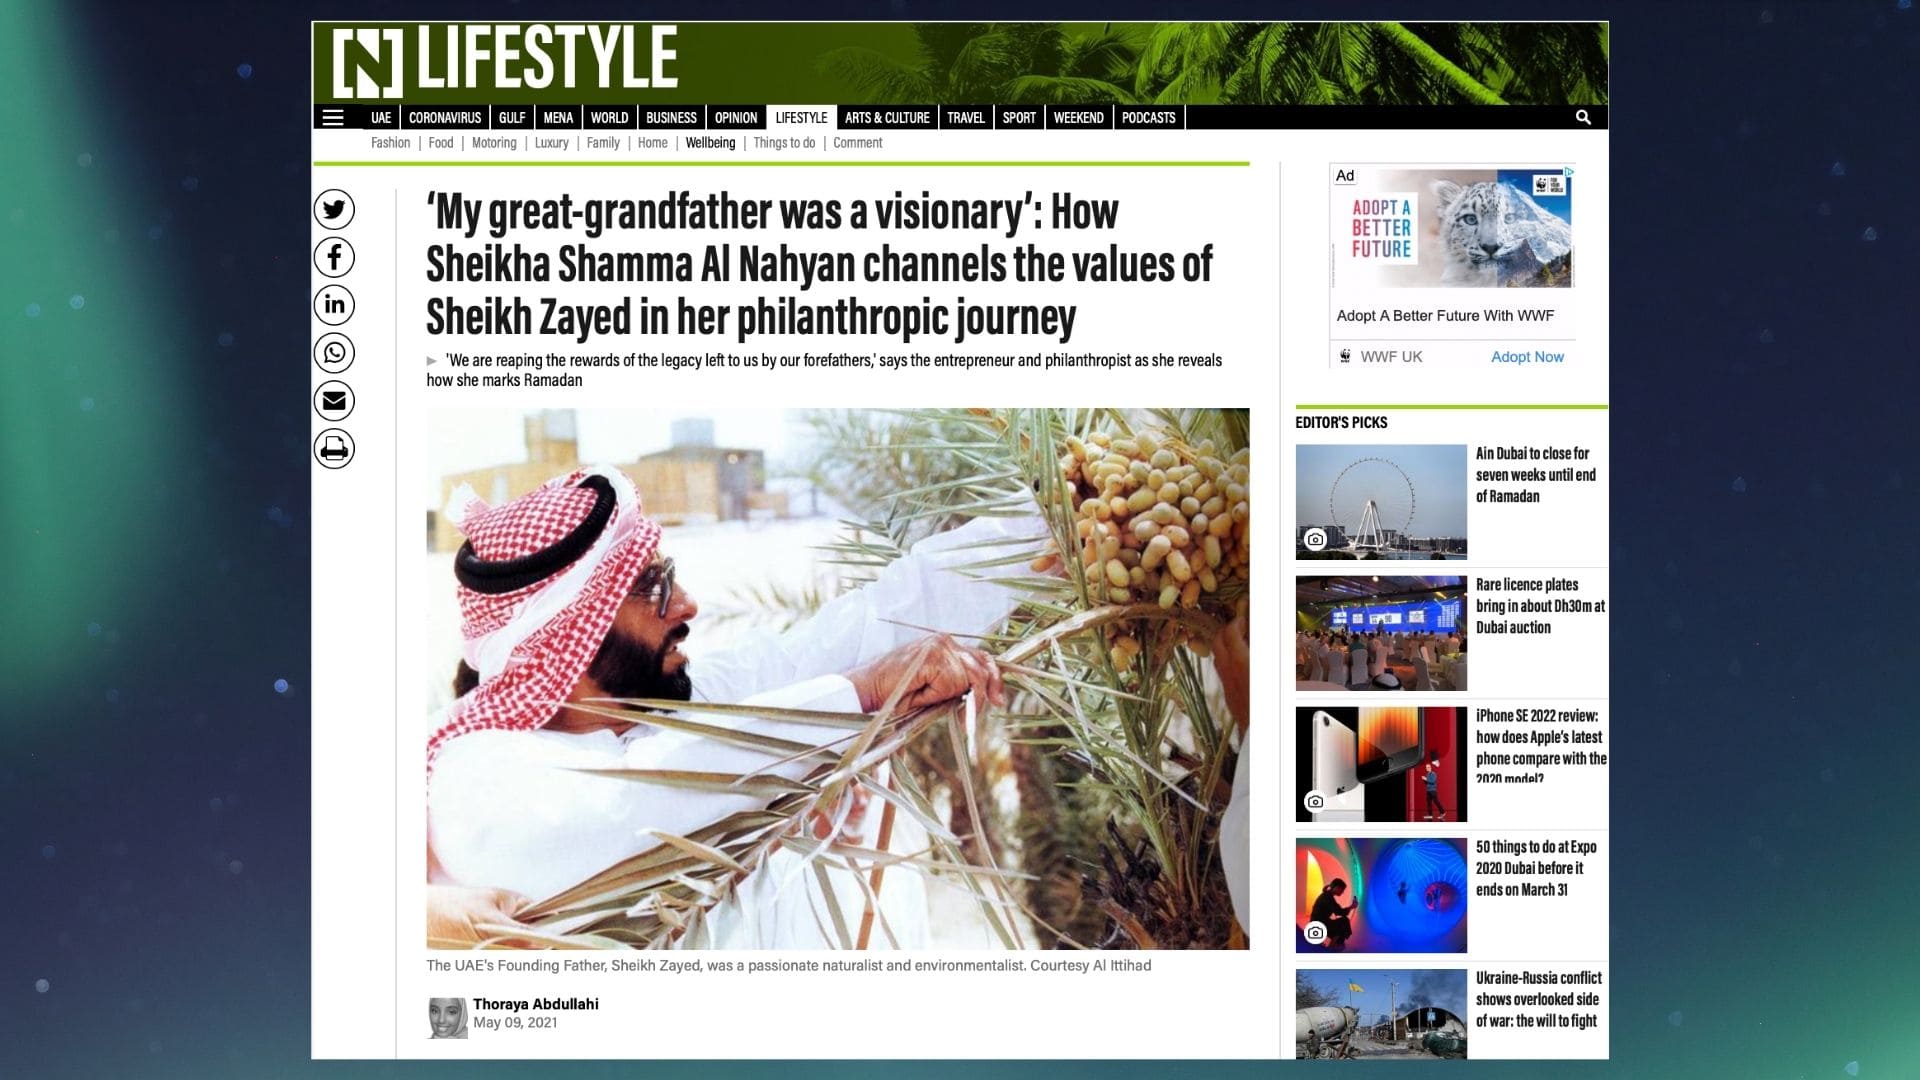 Aurora50 in the media - Sheikha Shamma writes in The National about great-grandfather Sheikh Zayed's philanthropy, 09/05/21